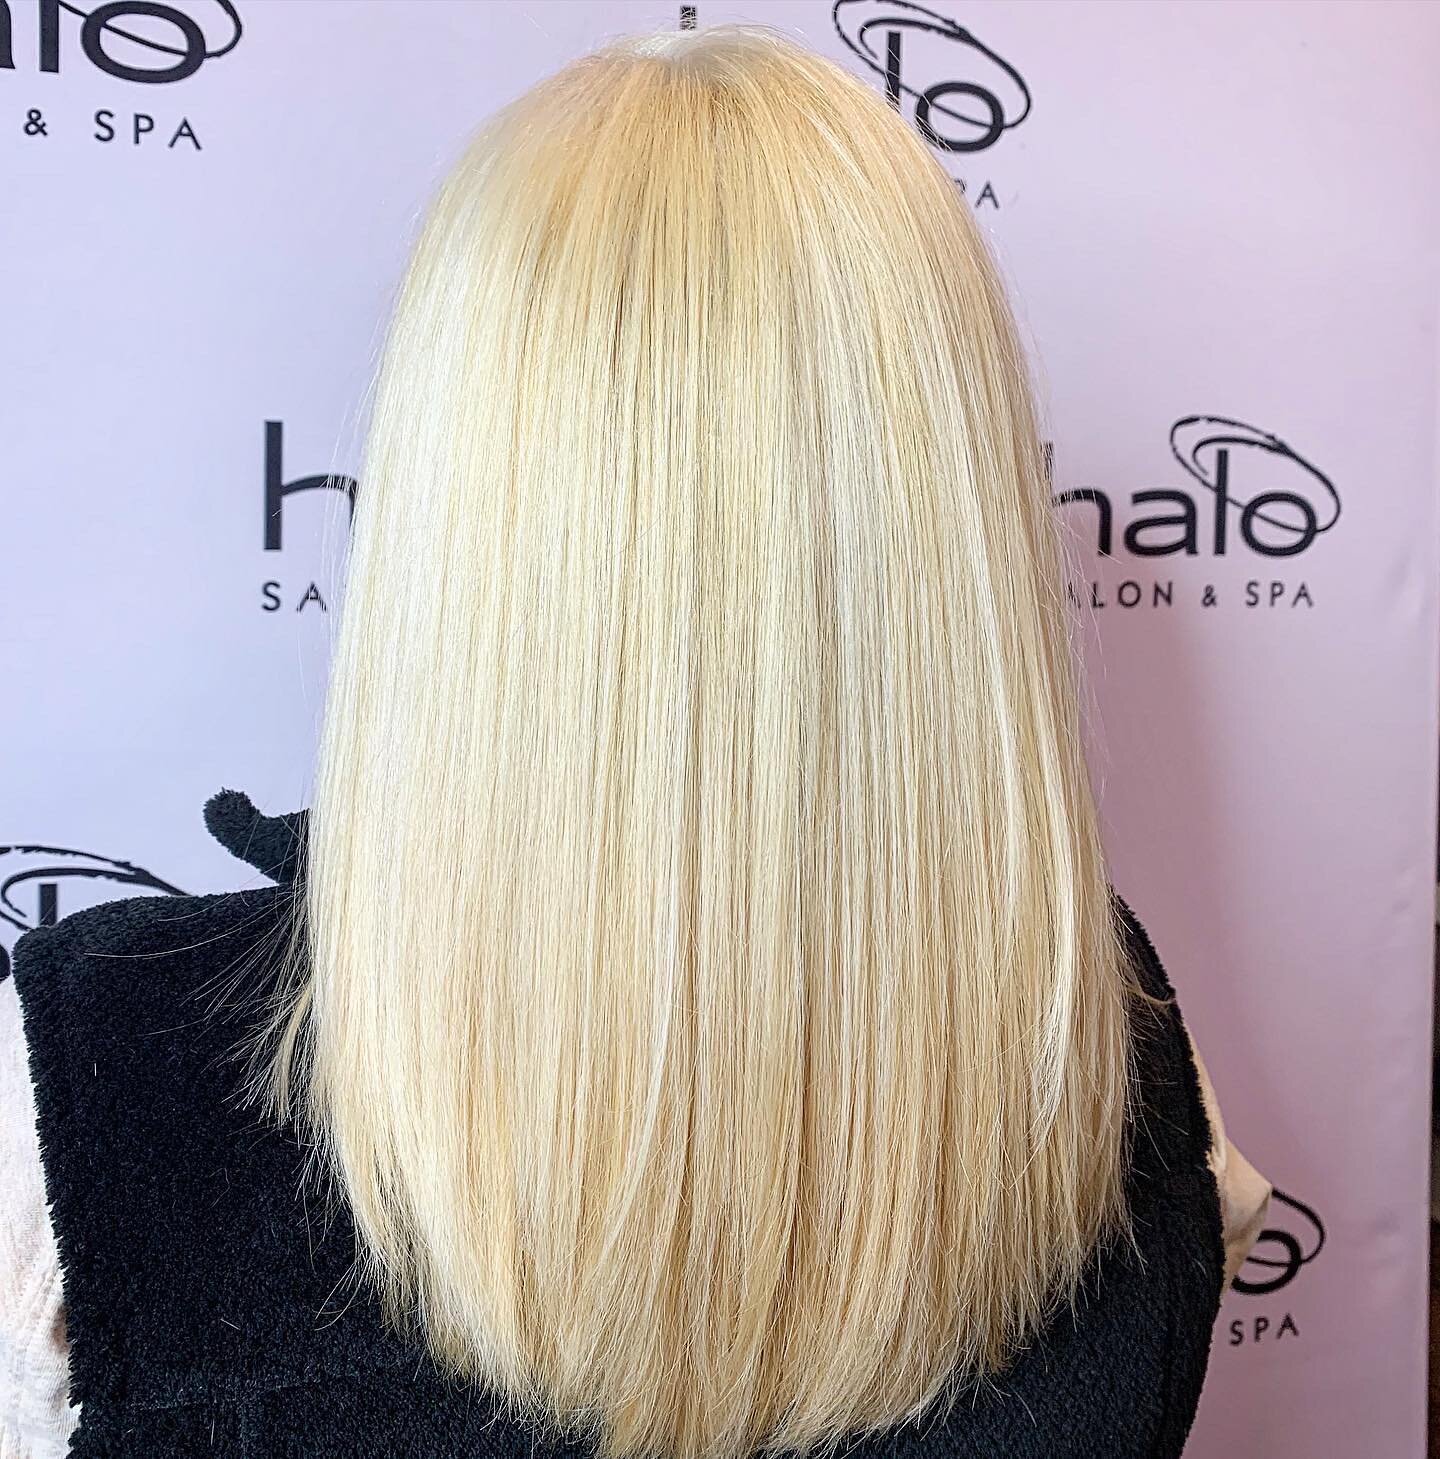 Setting the tone:

Sarah&rsquo;s client Beth wanted to amp up her blonde, so Sarah lightened and toned her to a vibrant @goldwellcolor level 10 then added highlights for depth. Edgar and Emmalee assisted in getting this blonde beauty looking icy and 